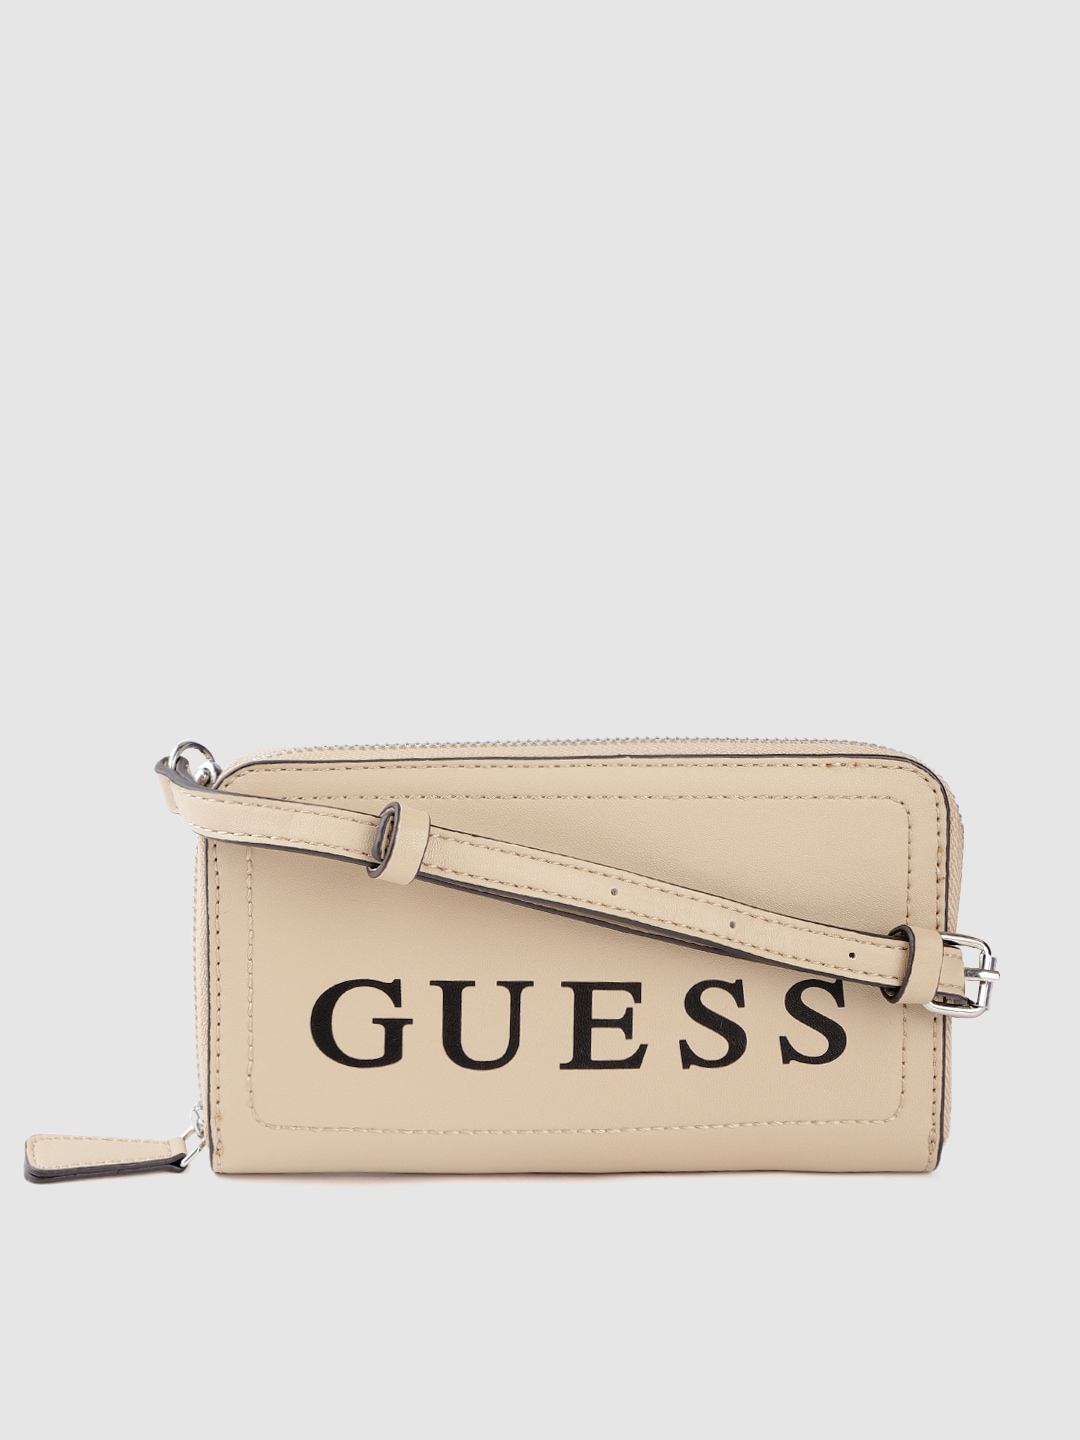 GUESS Beige & Black Women Brand Logo Printed Zip Around Wallet with Detachable Sling Strap Price in India